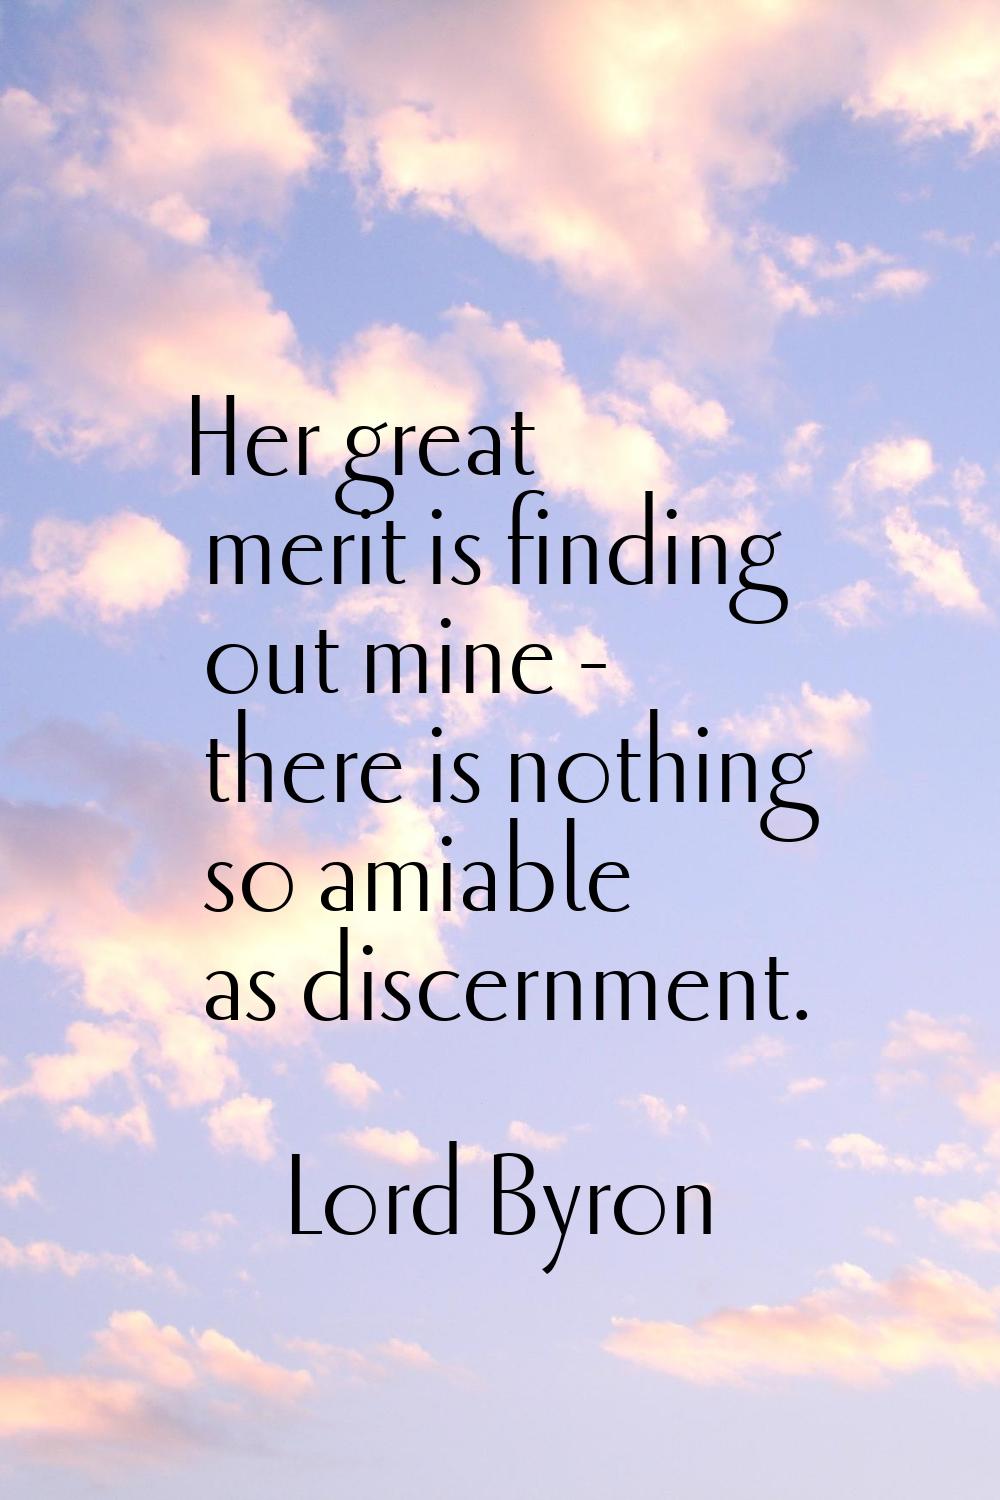 Her great merit is finding out mine - there is nothing so amiable as discernment.